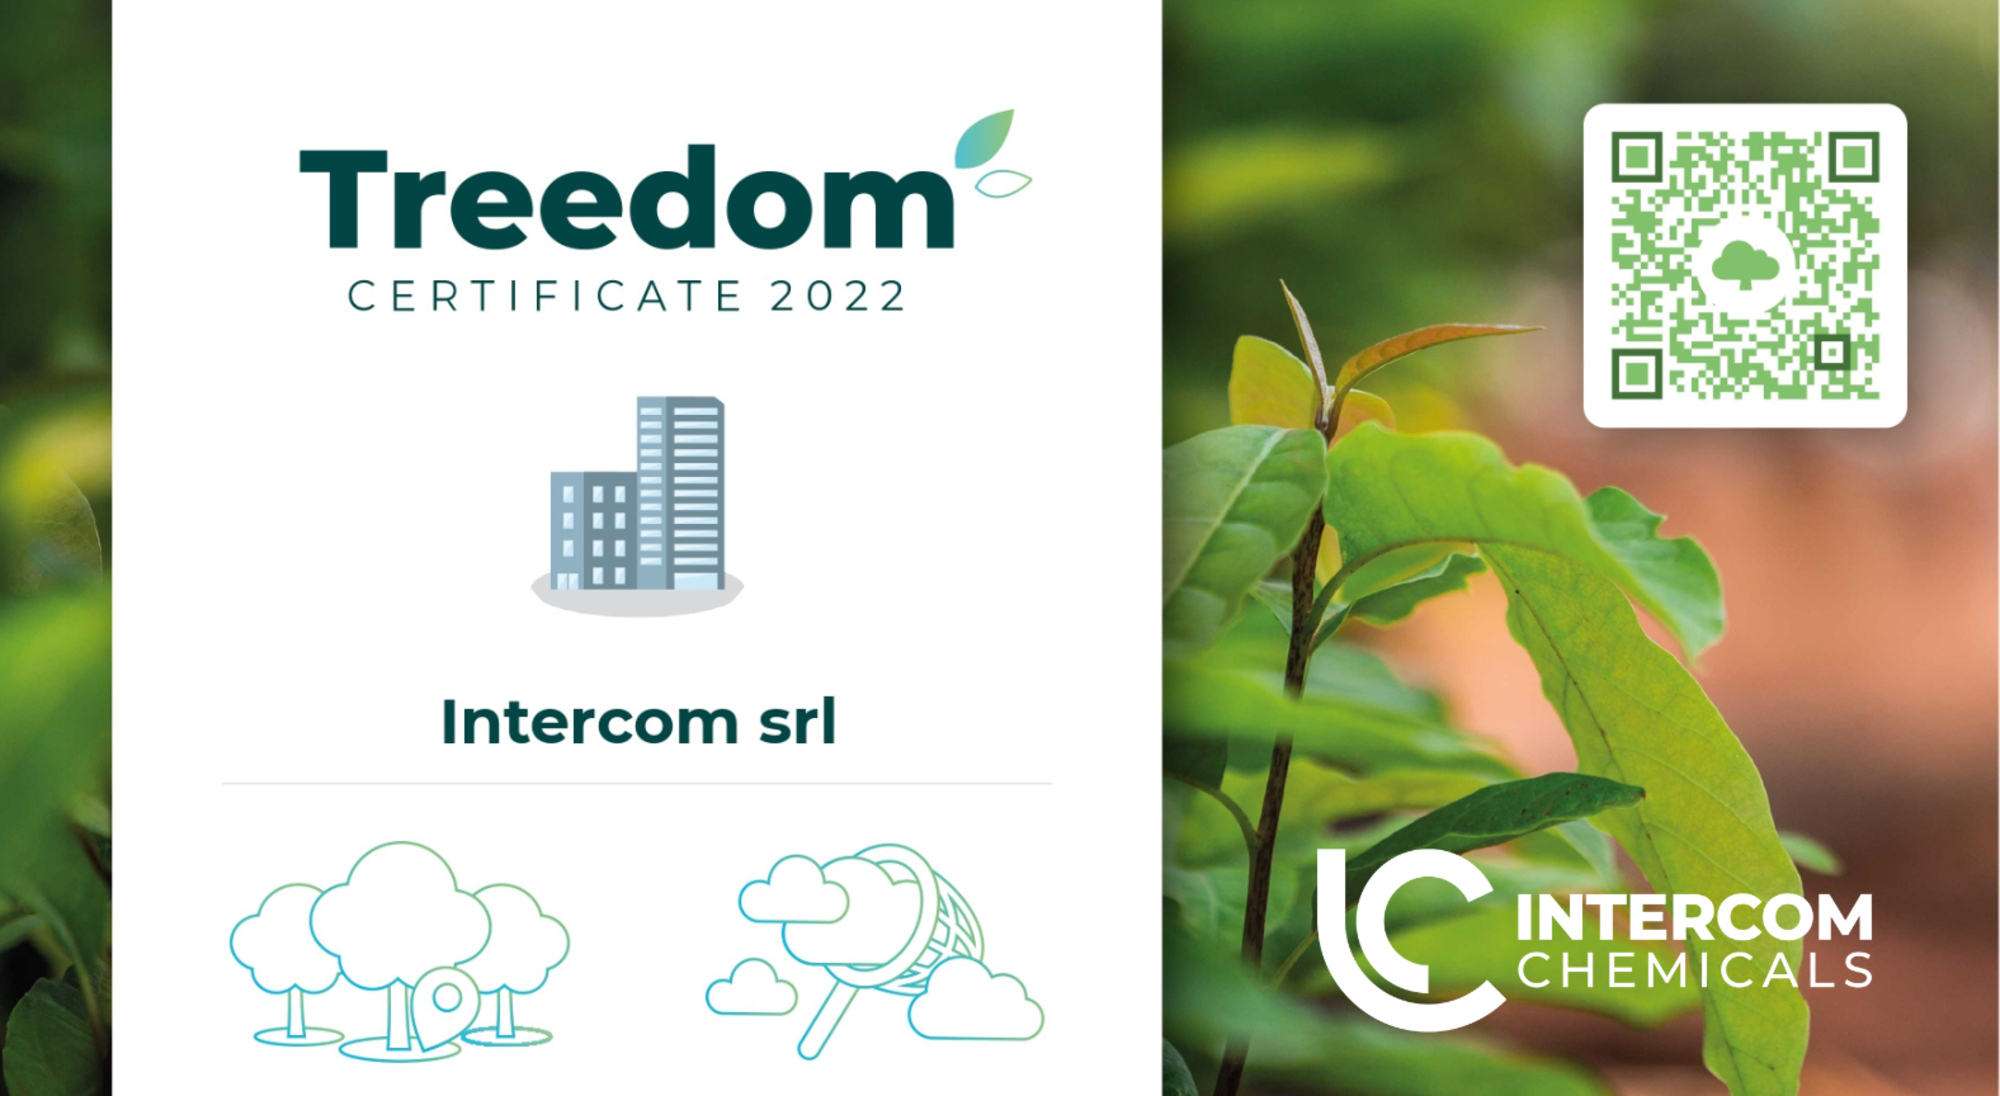 Intercom's commitment to the environment: supporting Treedom projects